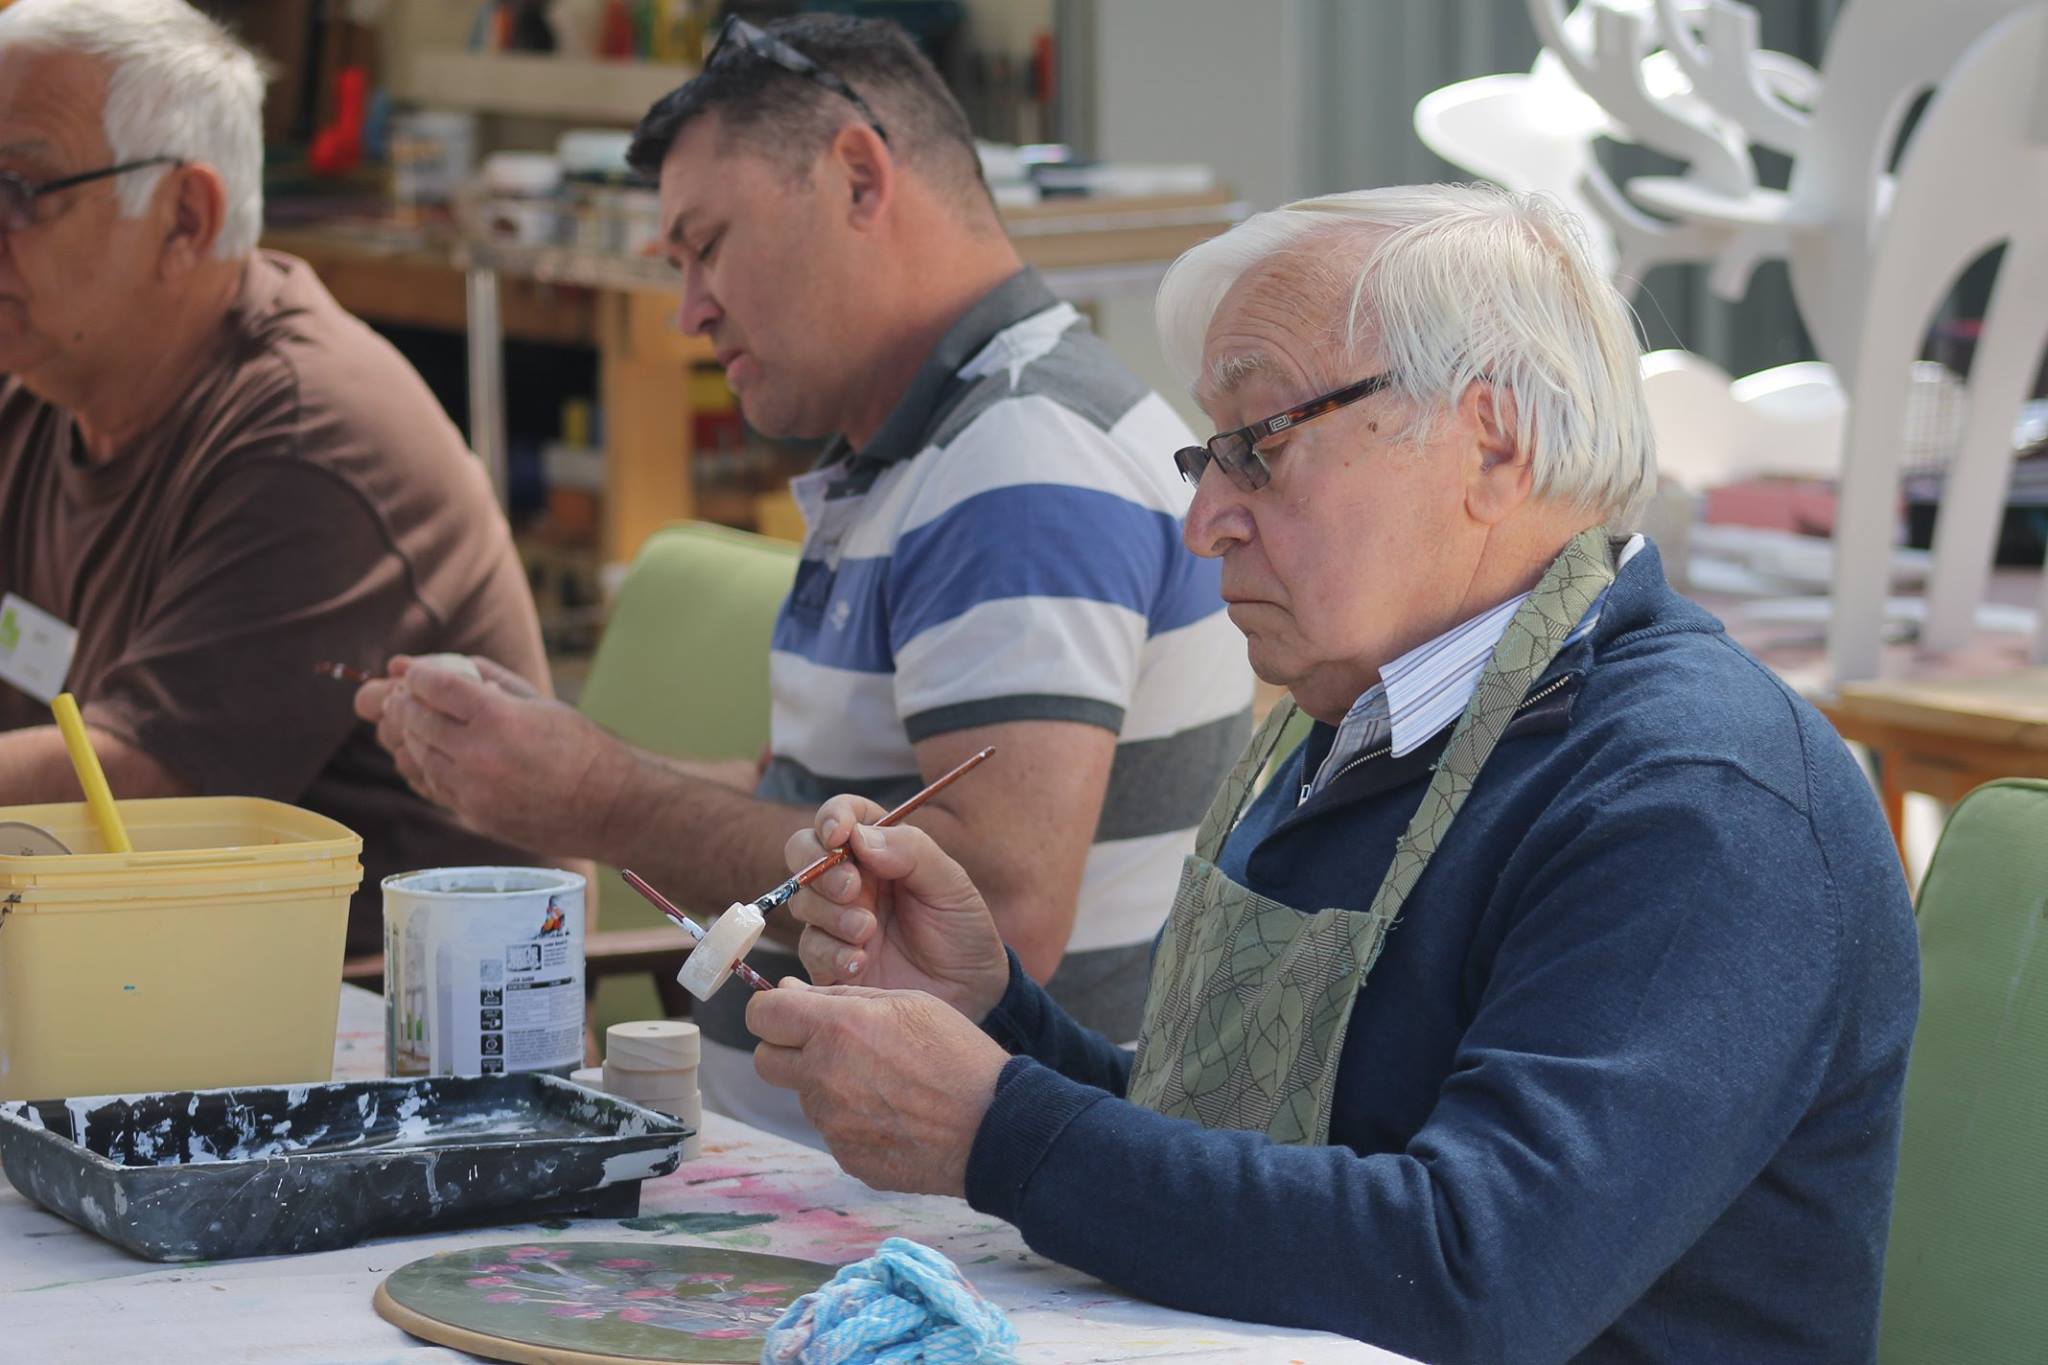 Port Noarlunga residential care home resident at painting workshop